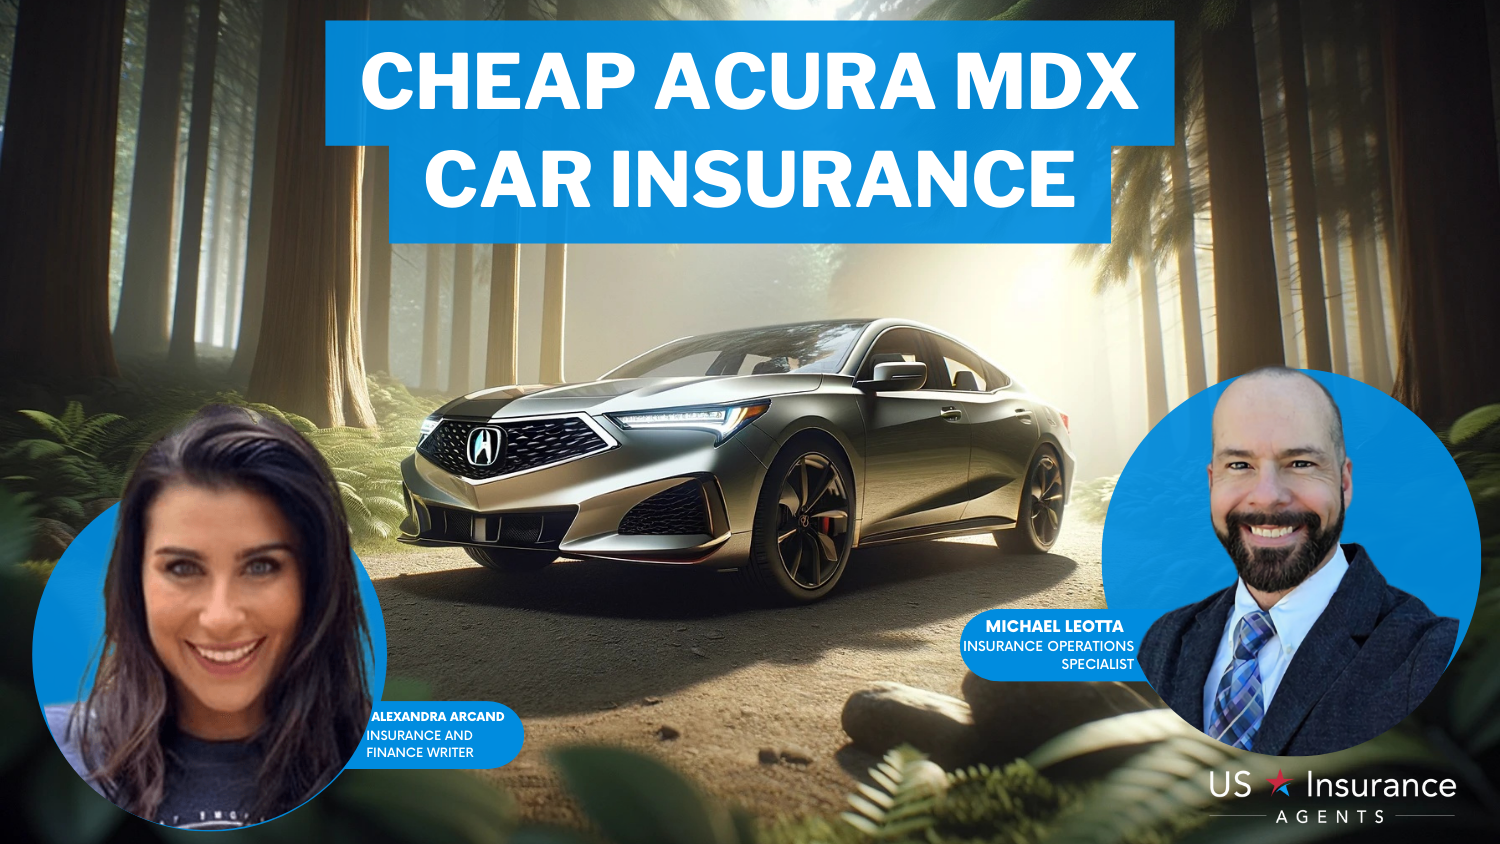 Cheap Acura MDX Car Insurance: American Family, USAA, and Travelers